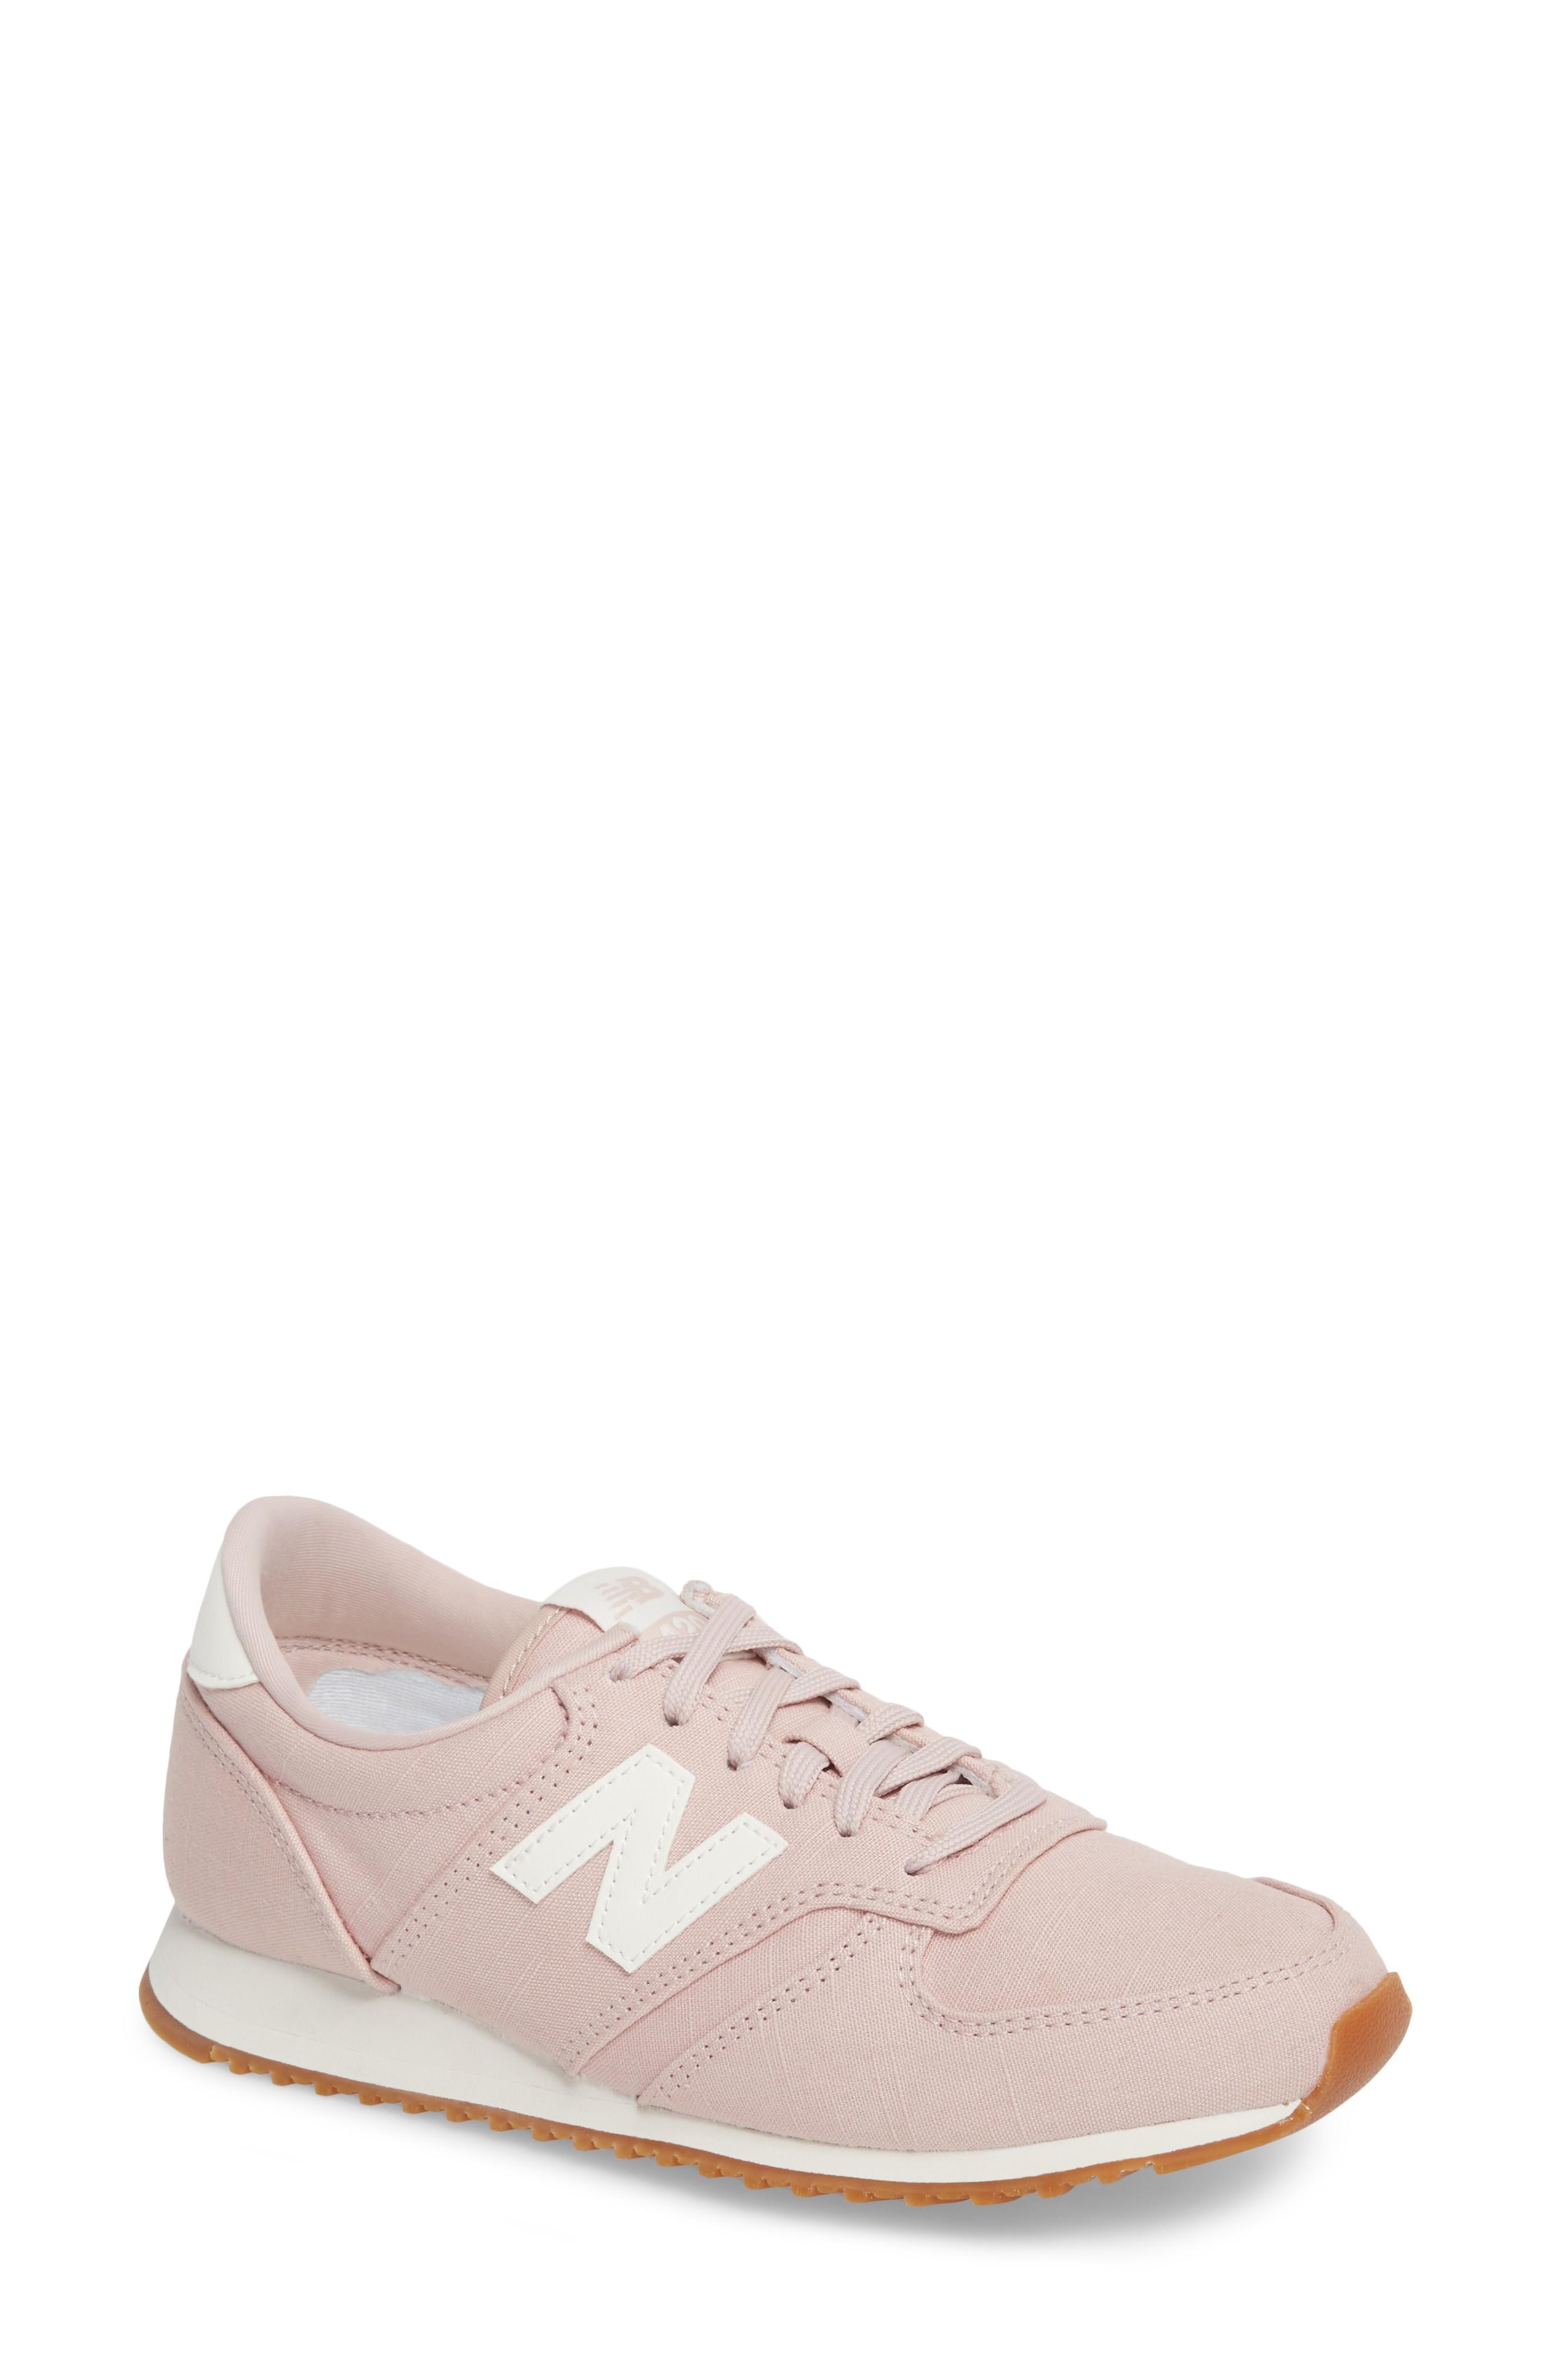 new balance 420 sneaker faded rose